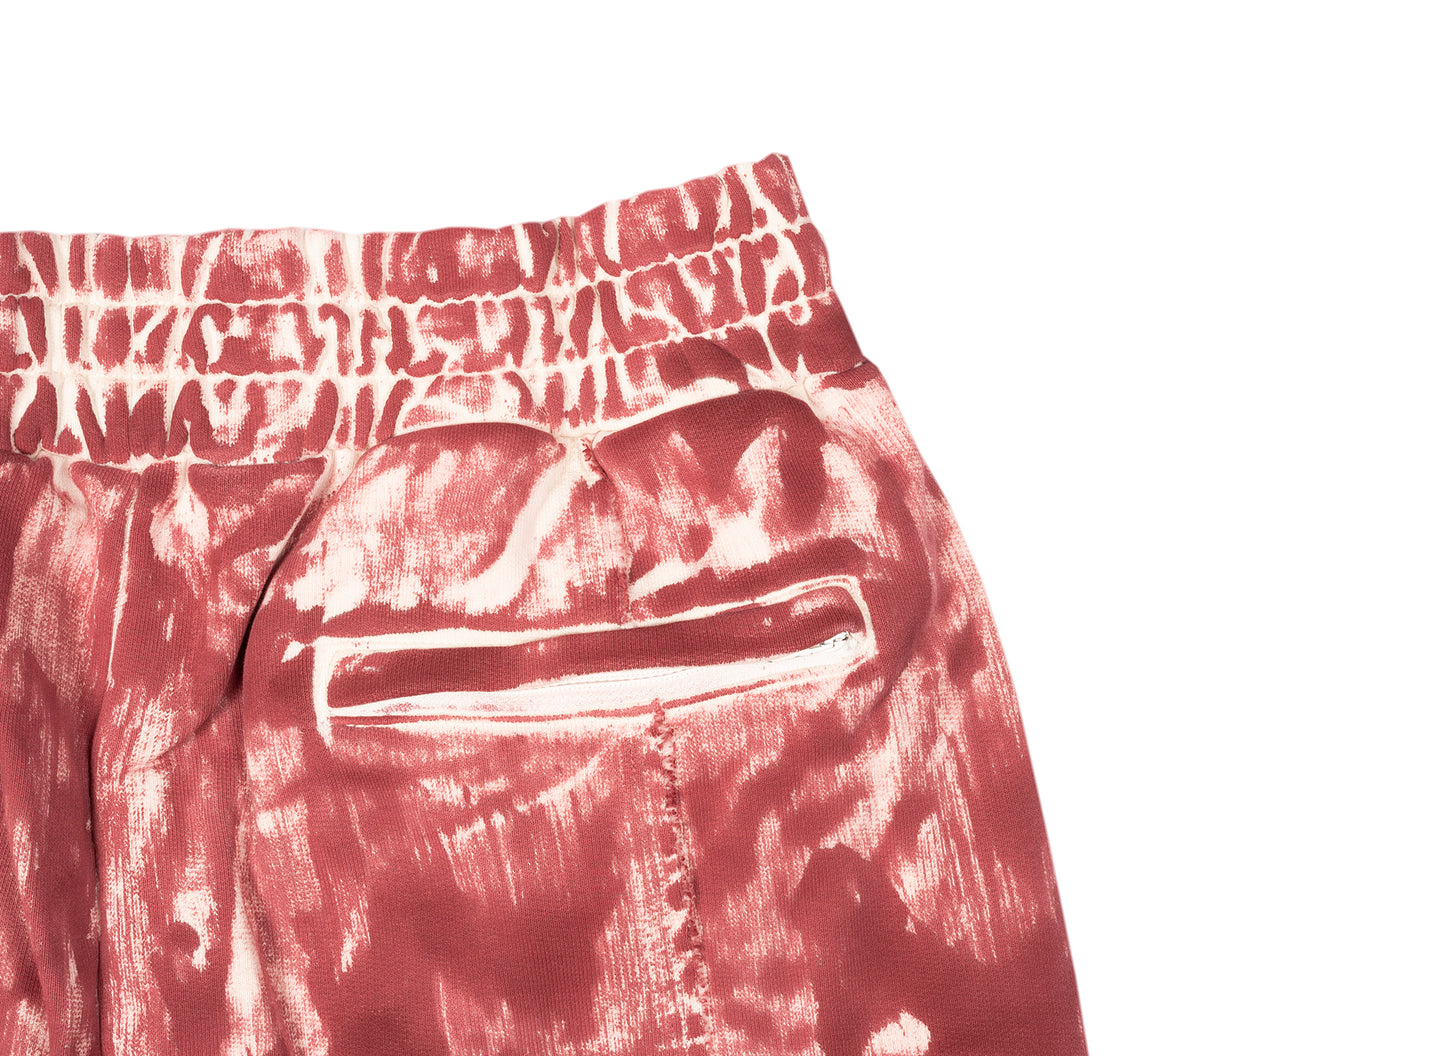 A-COLD-WALL* Corrosion Sweatpants in Deep Red